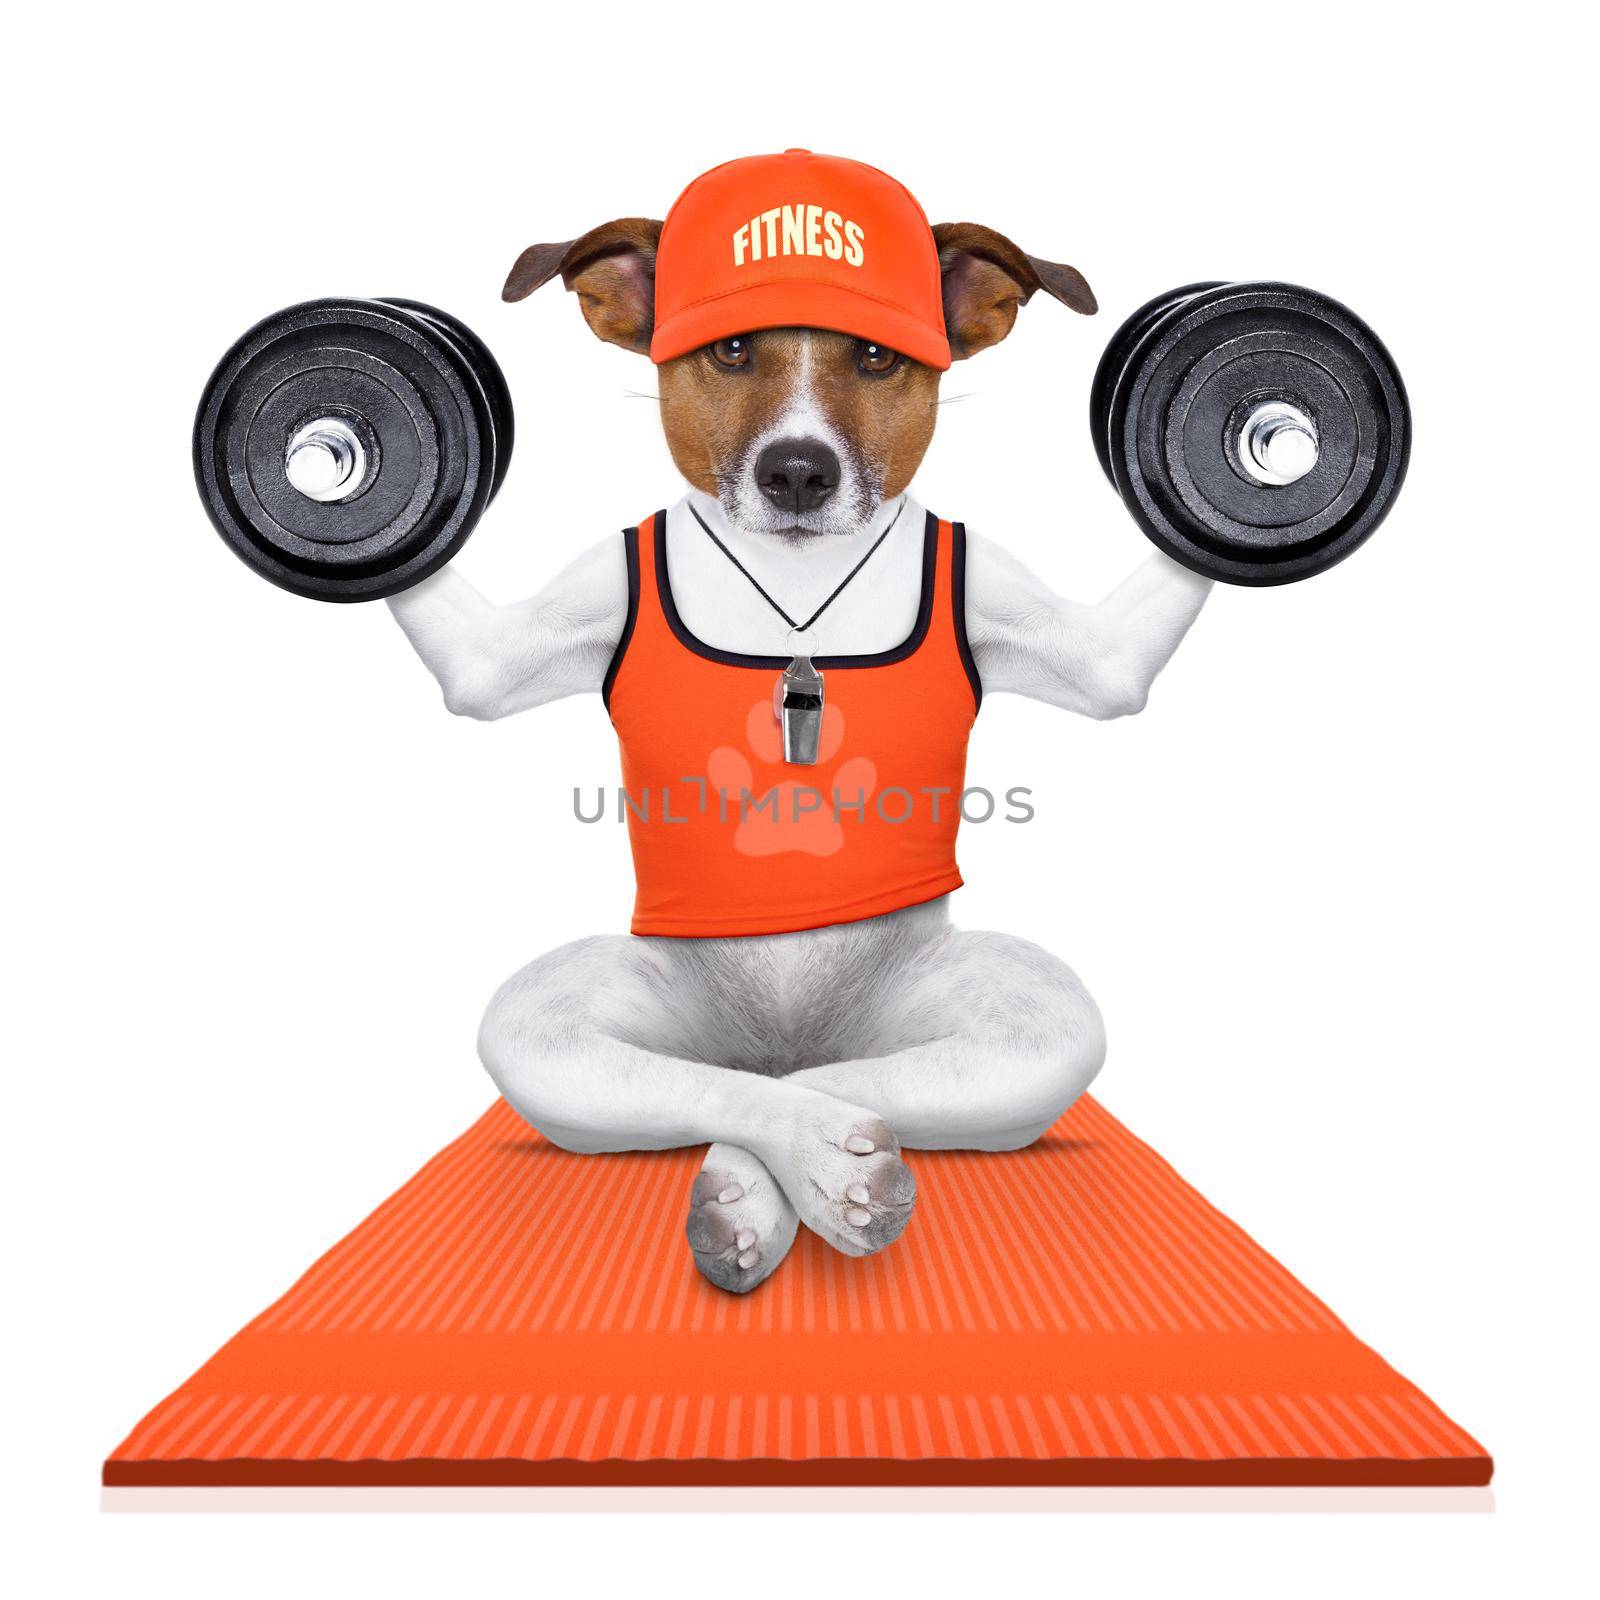 fitness jack russell dog lifting a heavy big dumbbell, as personal trainer ,on a sport mat,  isolated on white background